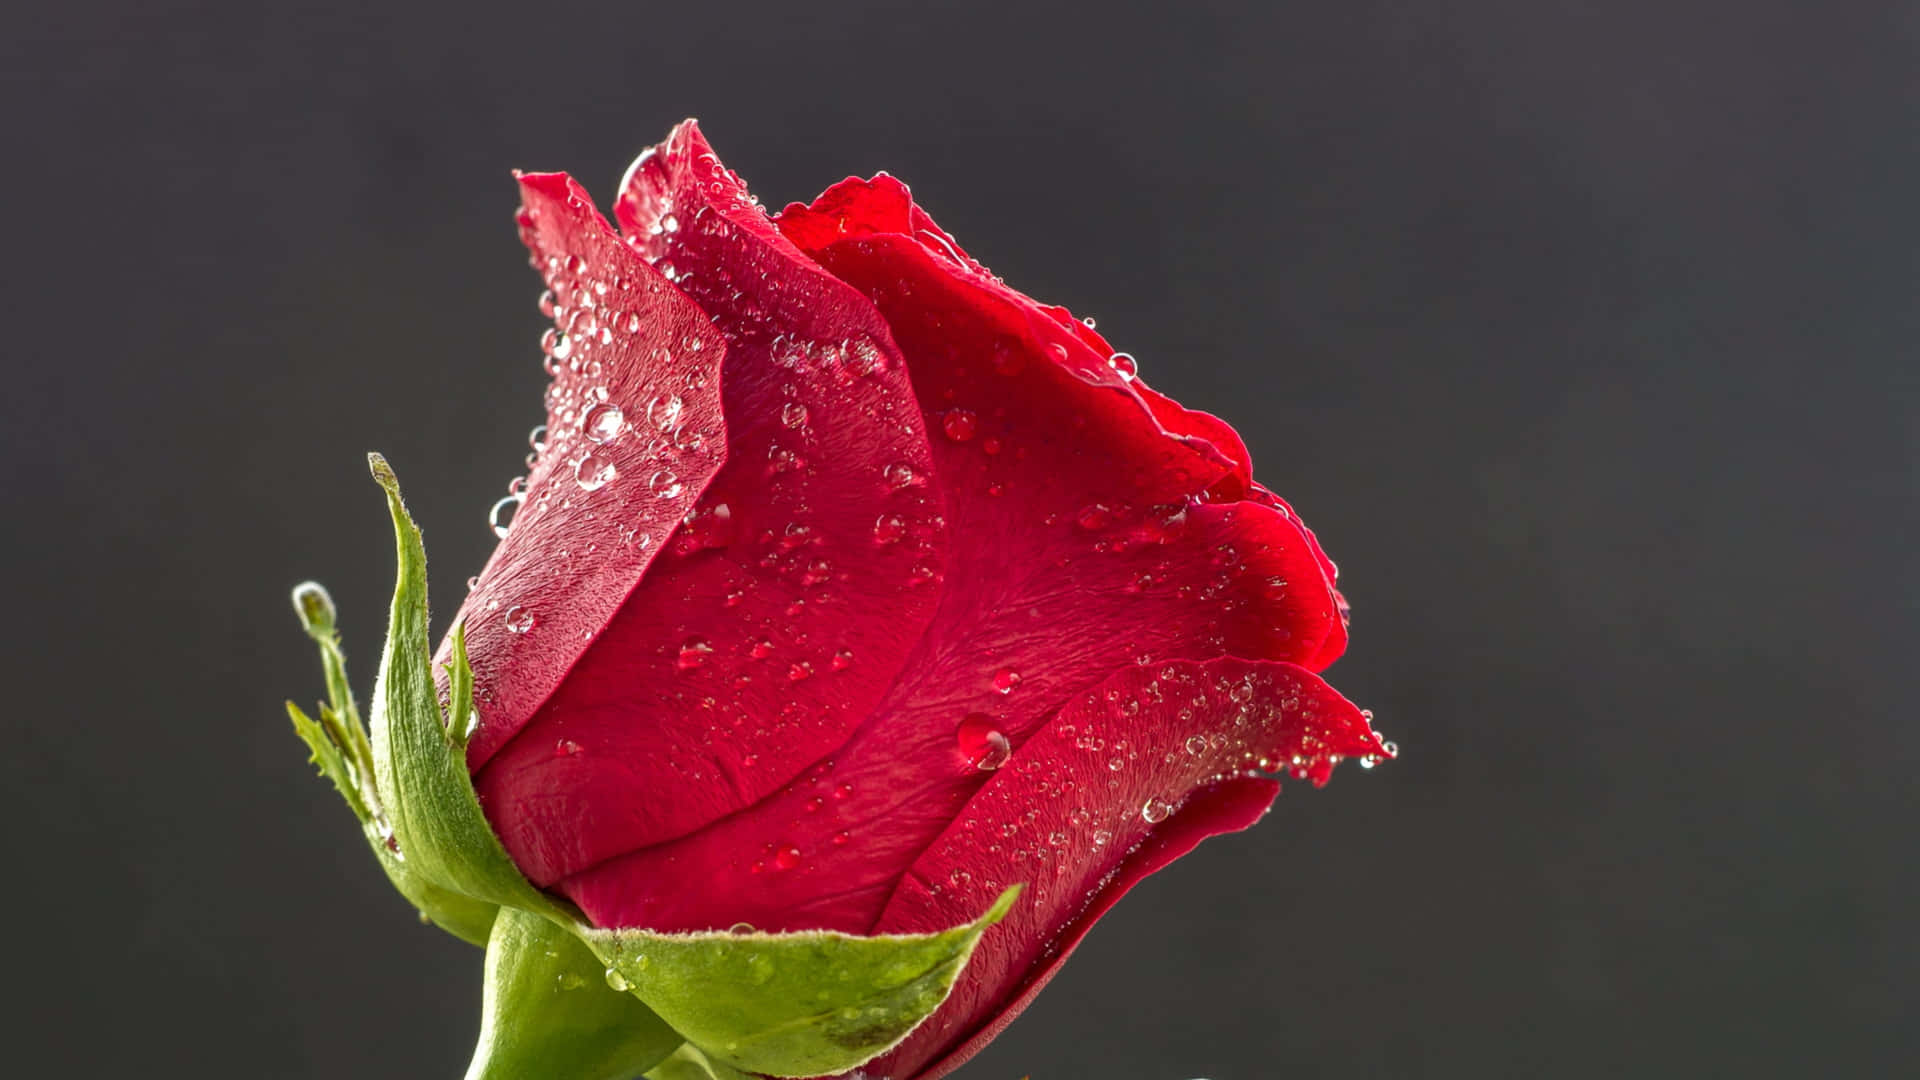 The beauty of a single rose